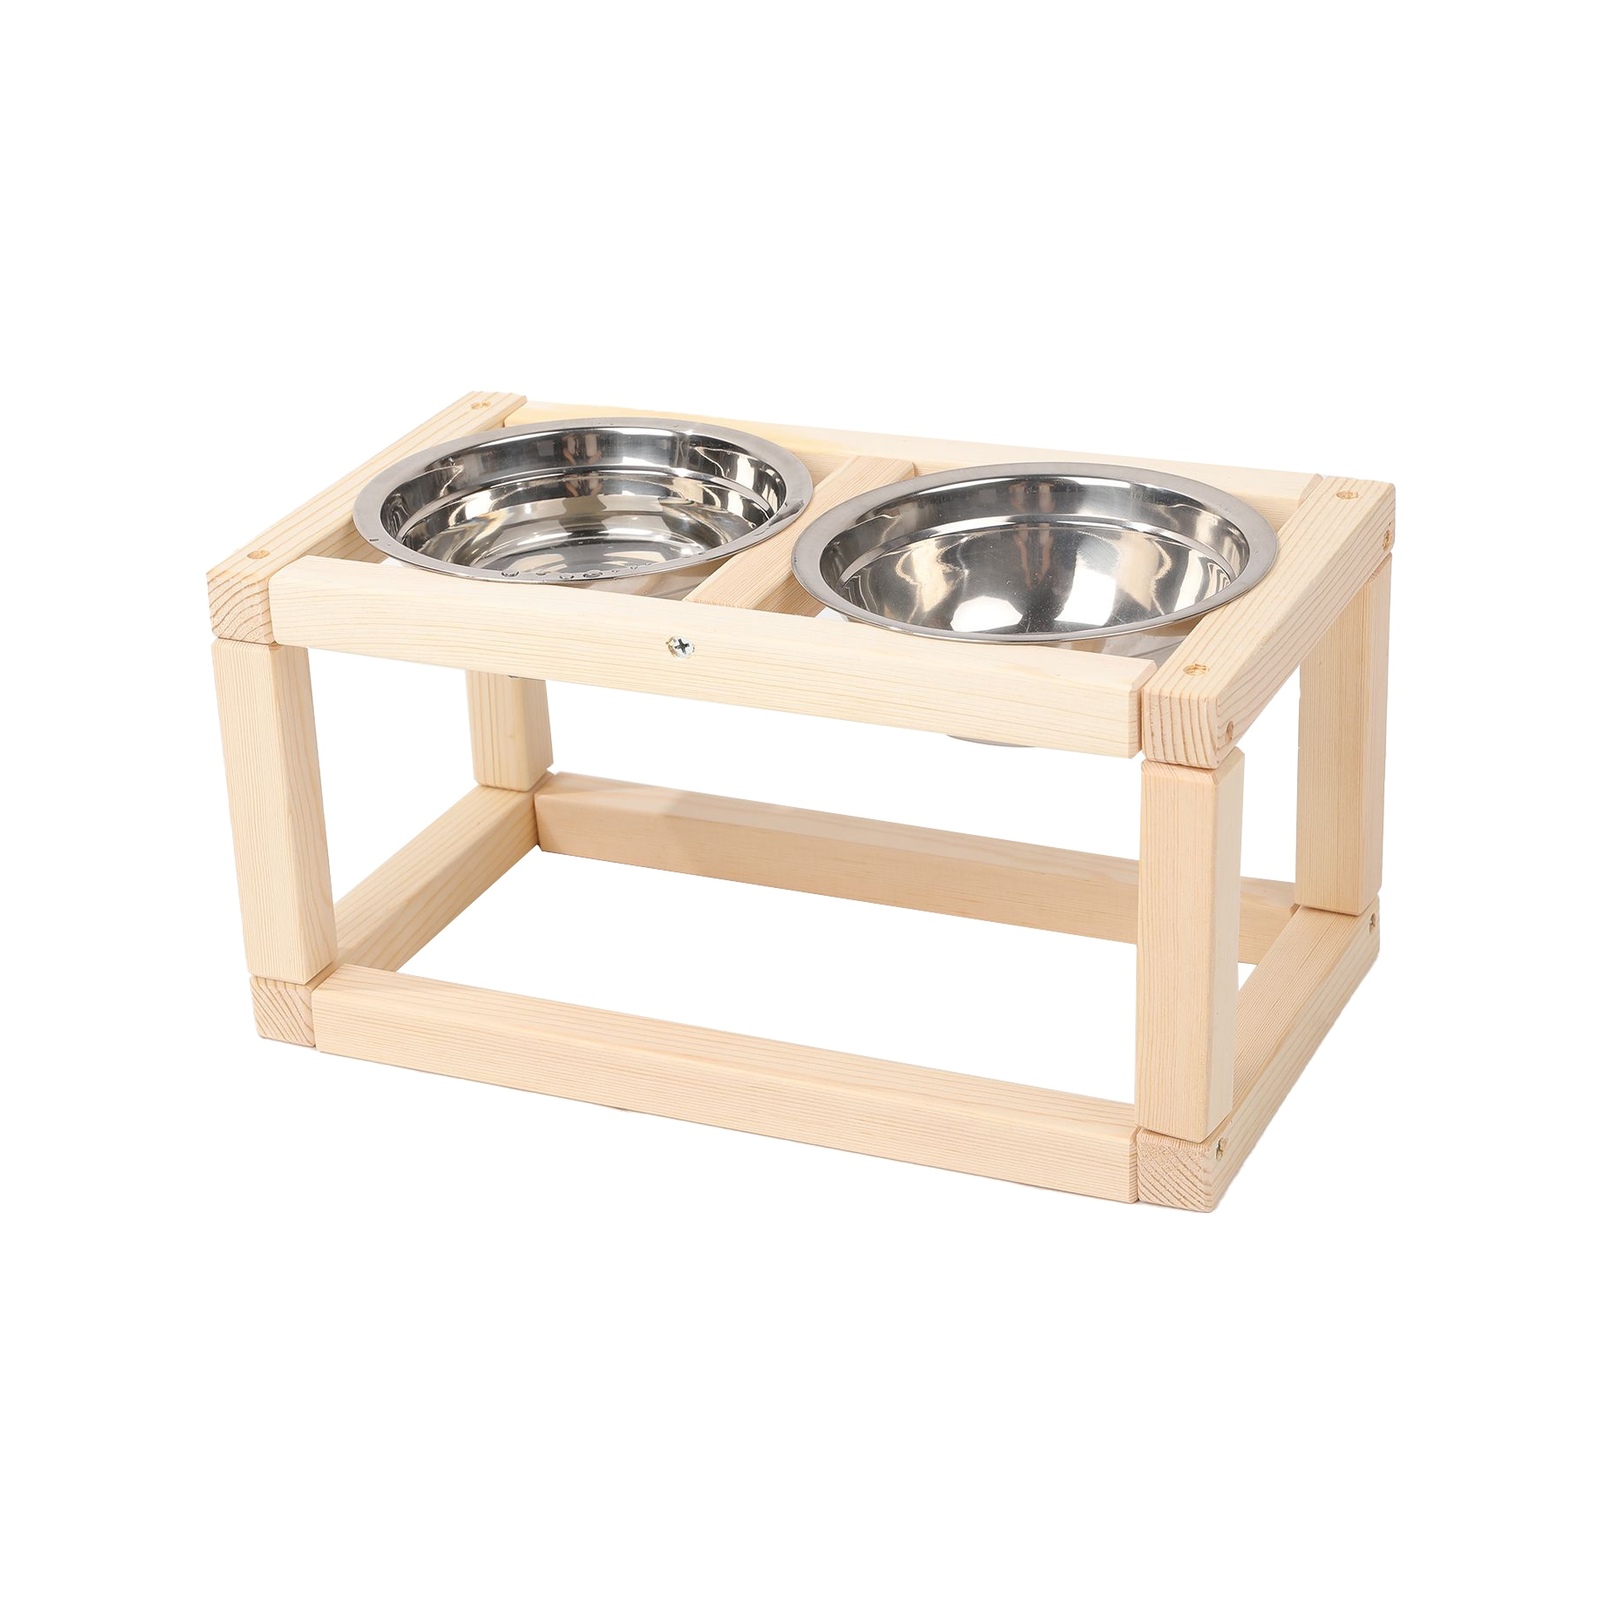 Kit Out 34 x 18 x 18cm Wood Pet Bowl Stand